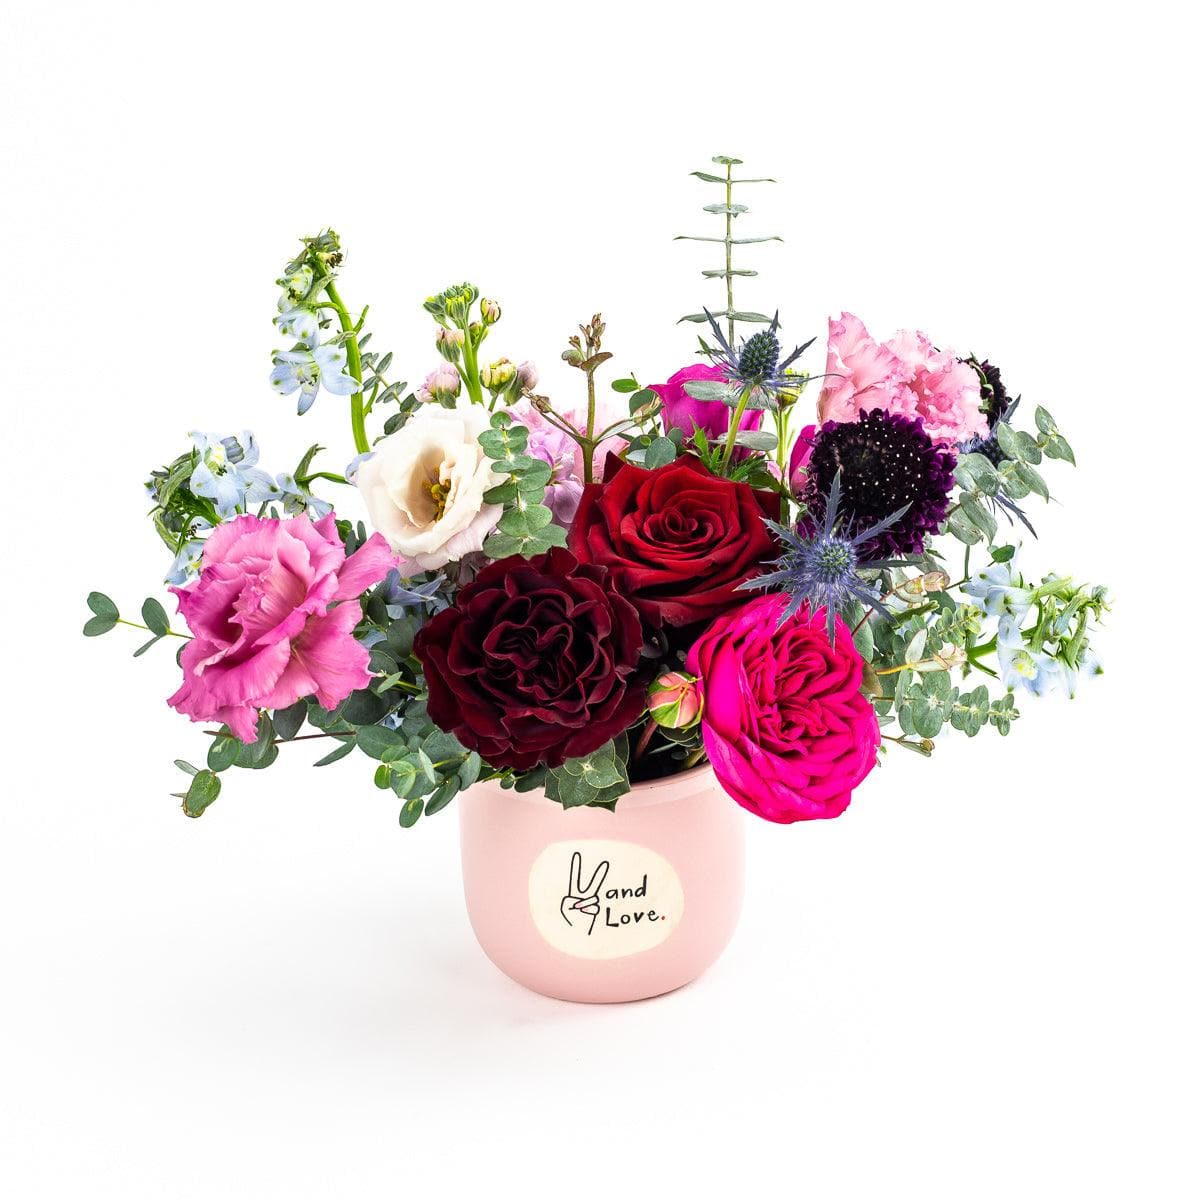 Shop Peace + Love Floral online from Green Fresh Florals + Plants